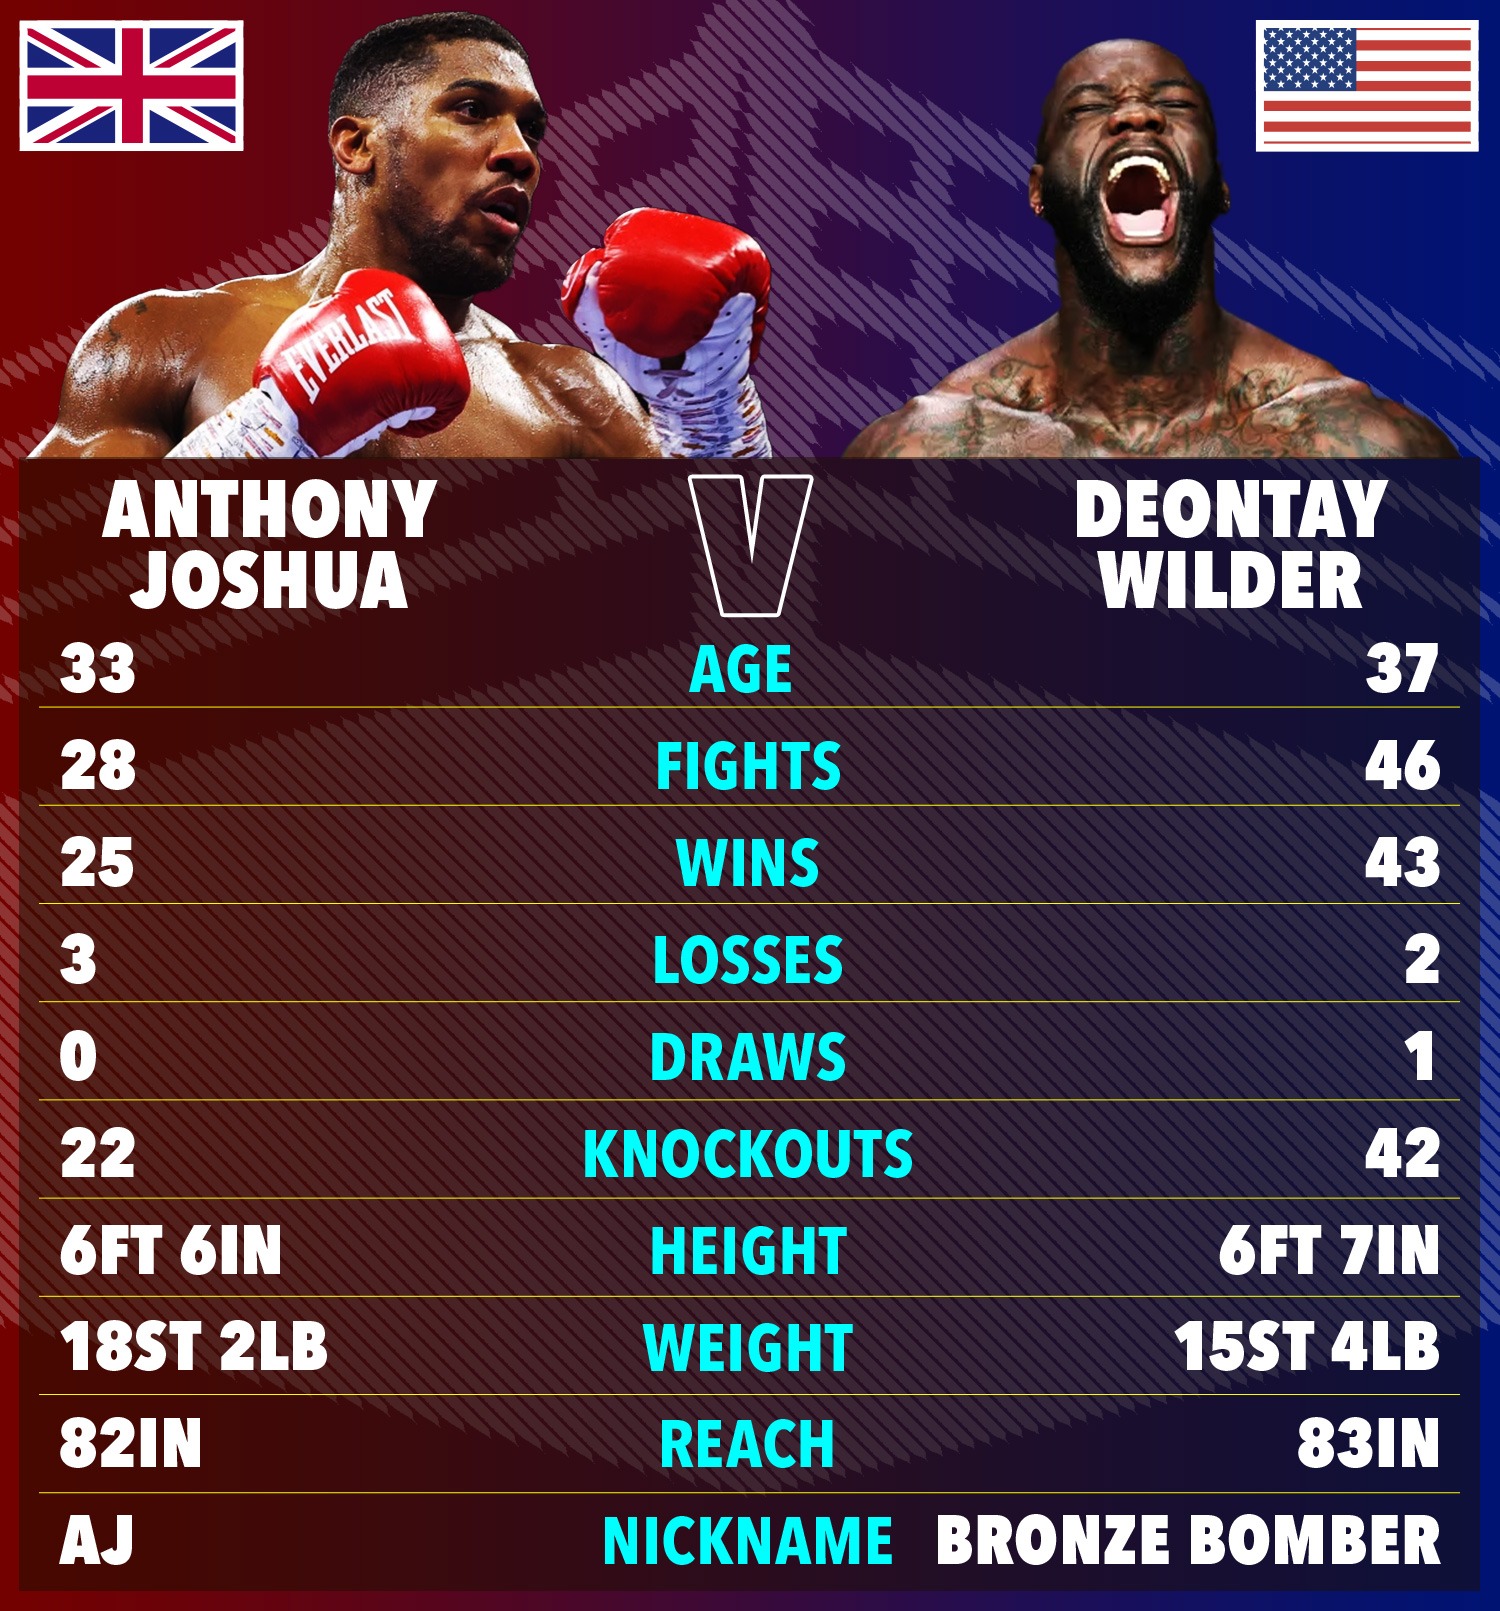 , Deontay Wilder’s coach says Anthony Joshua is ‘right in line’ to get brutally knocked out but heaps praise on Brit star